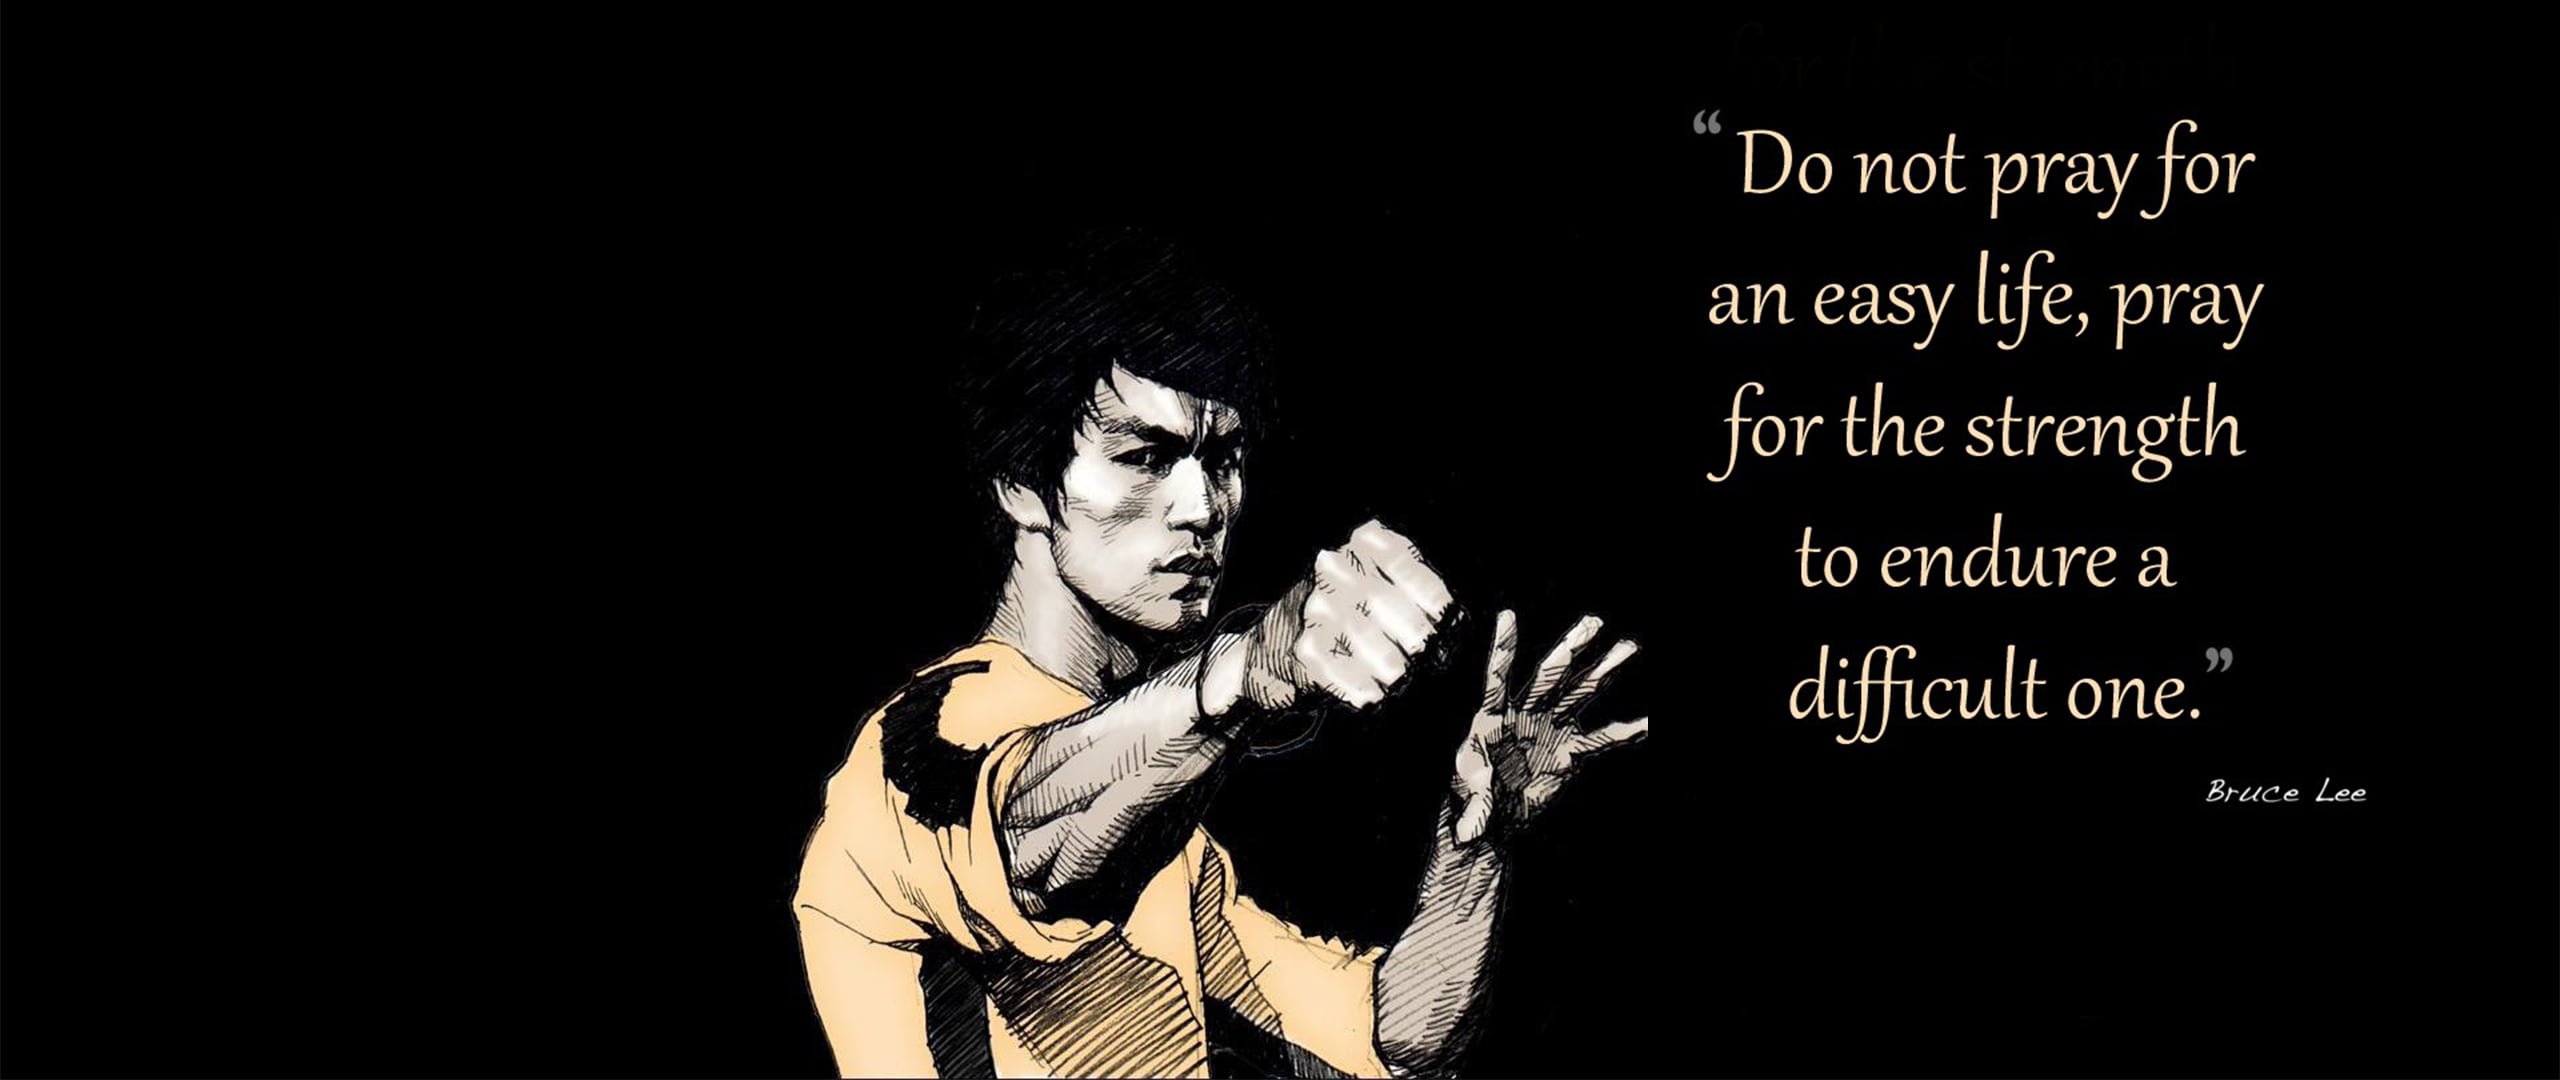 Bruce Lee, ultra-wide, quote, Bruce Lee